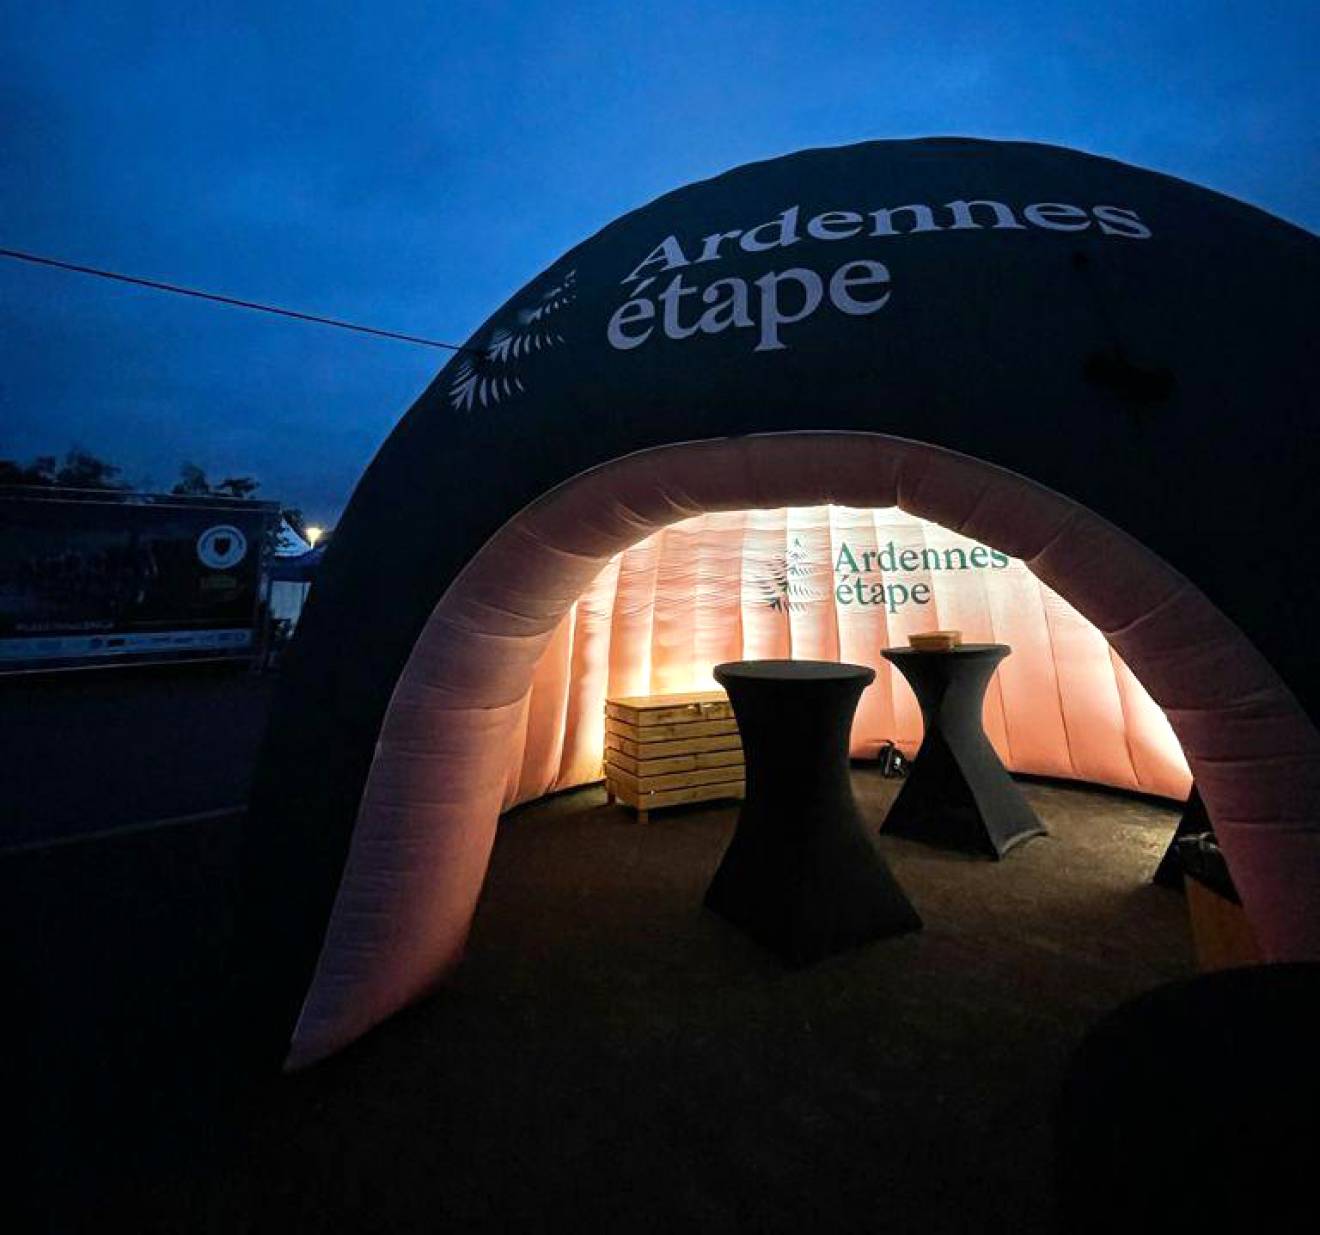 Giant inflatable standen Ardennes étape, tent, igloo, opblaasbare stand X-Treme Creations